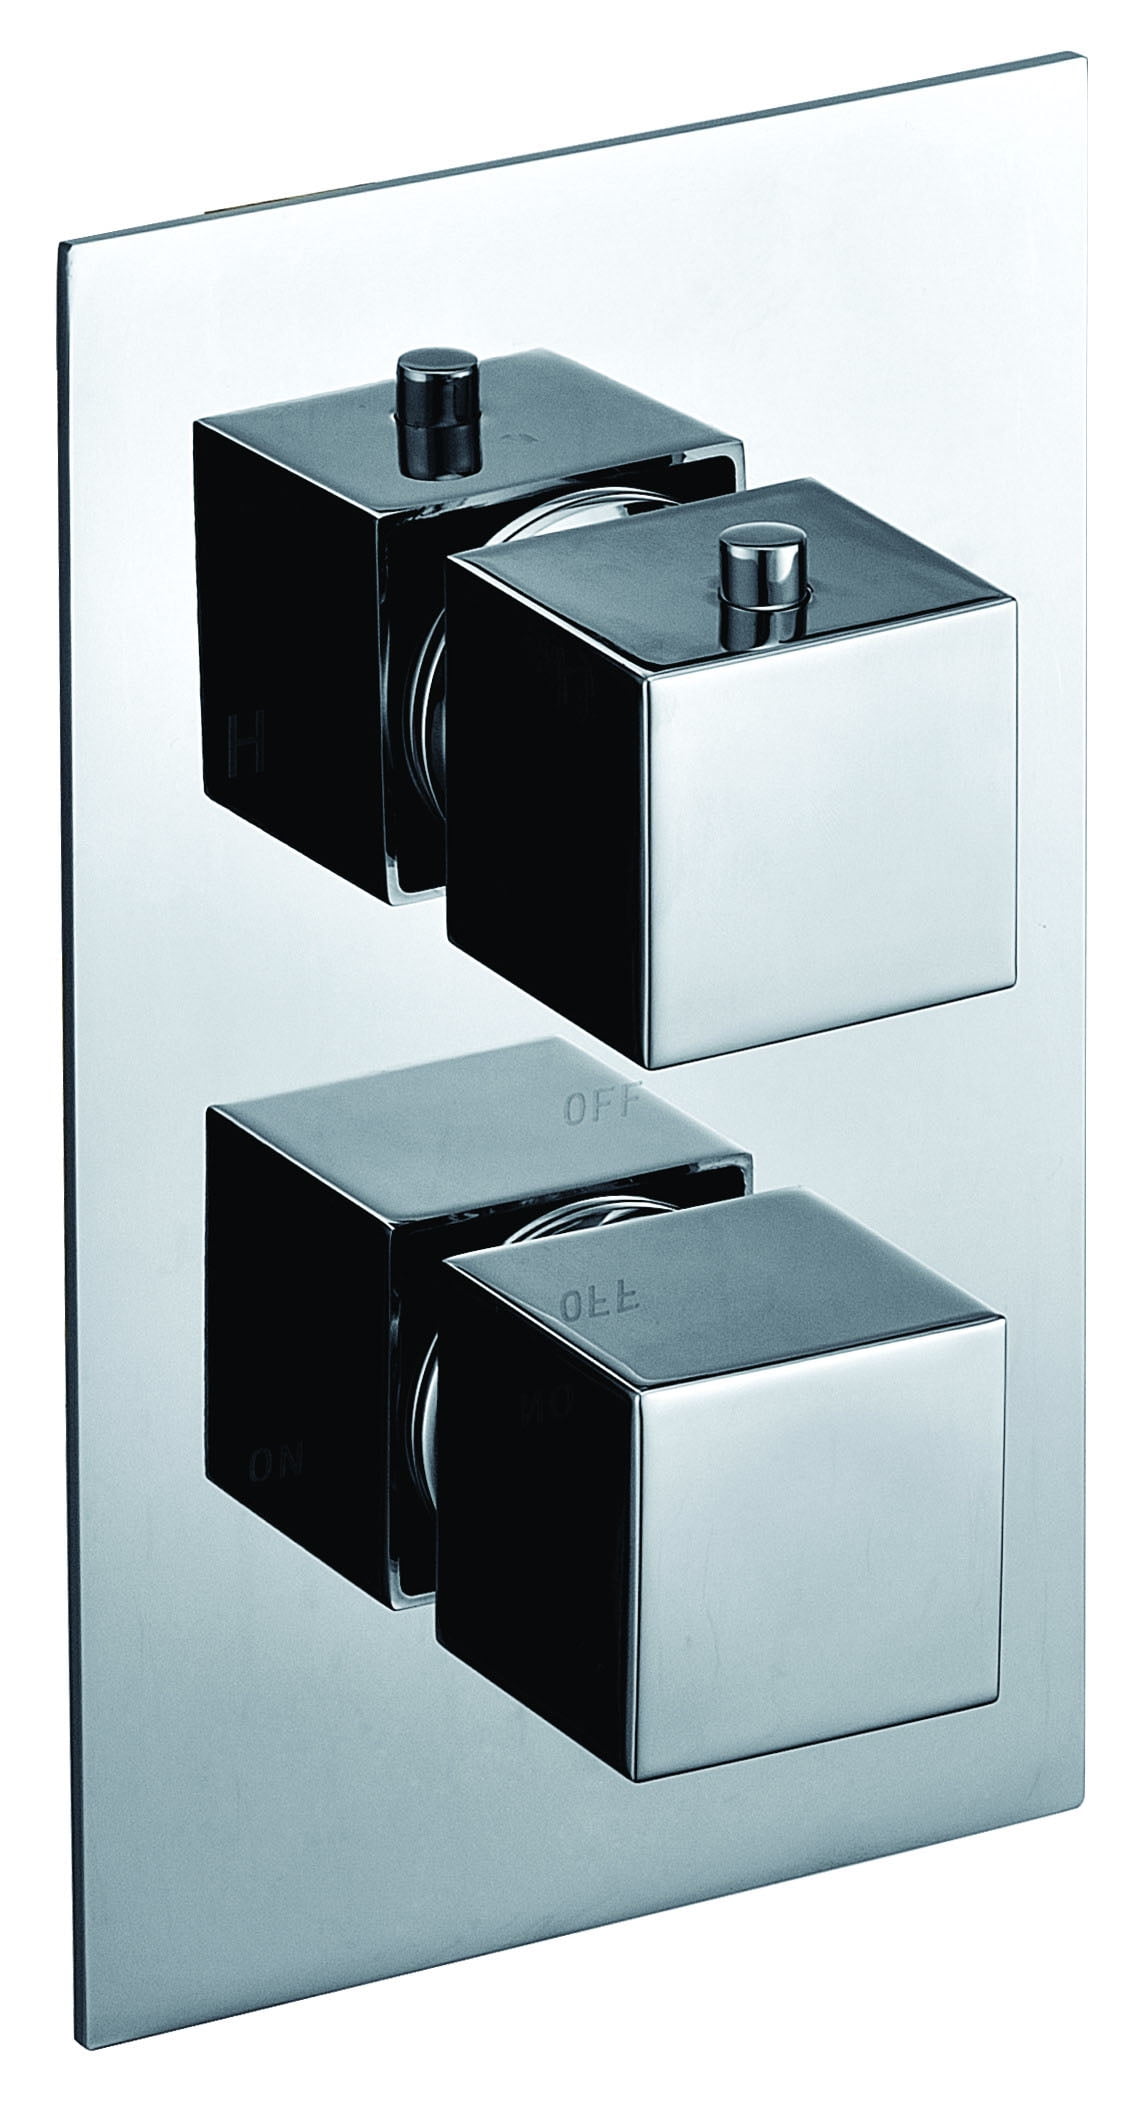 Picture of Alfi Brand AB2601-PC Square Knob 1 Way Thermostatic Shower Mixer - Polished Chrome